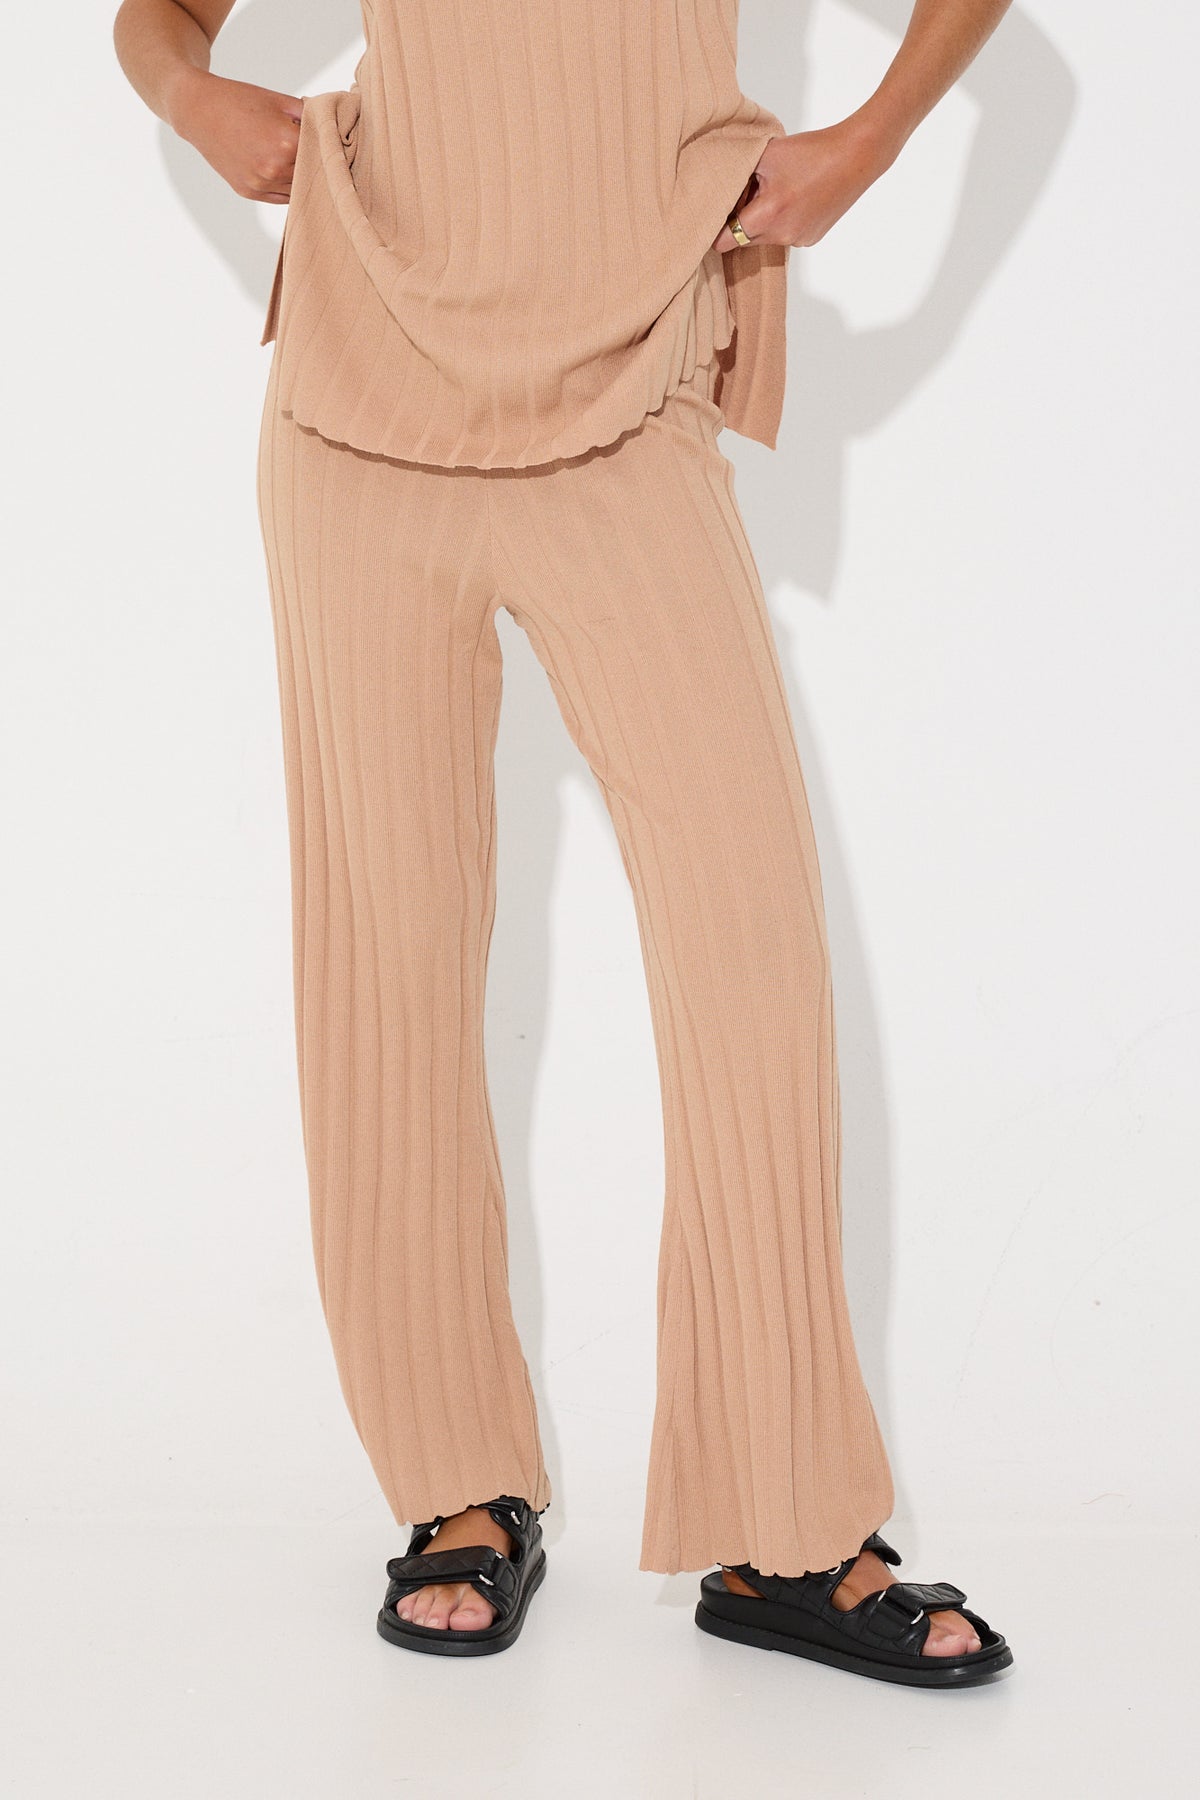 Lucia Ribbed Pant Latte